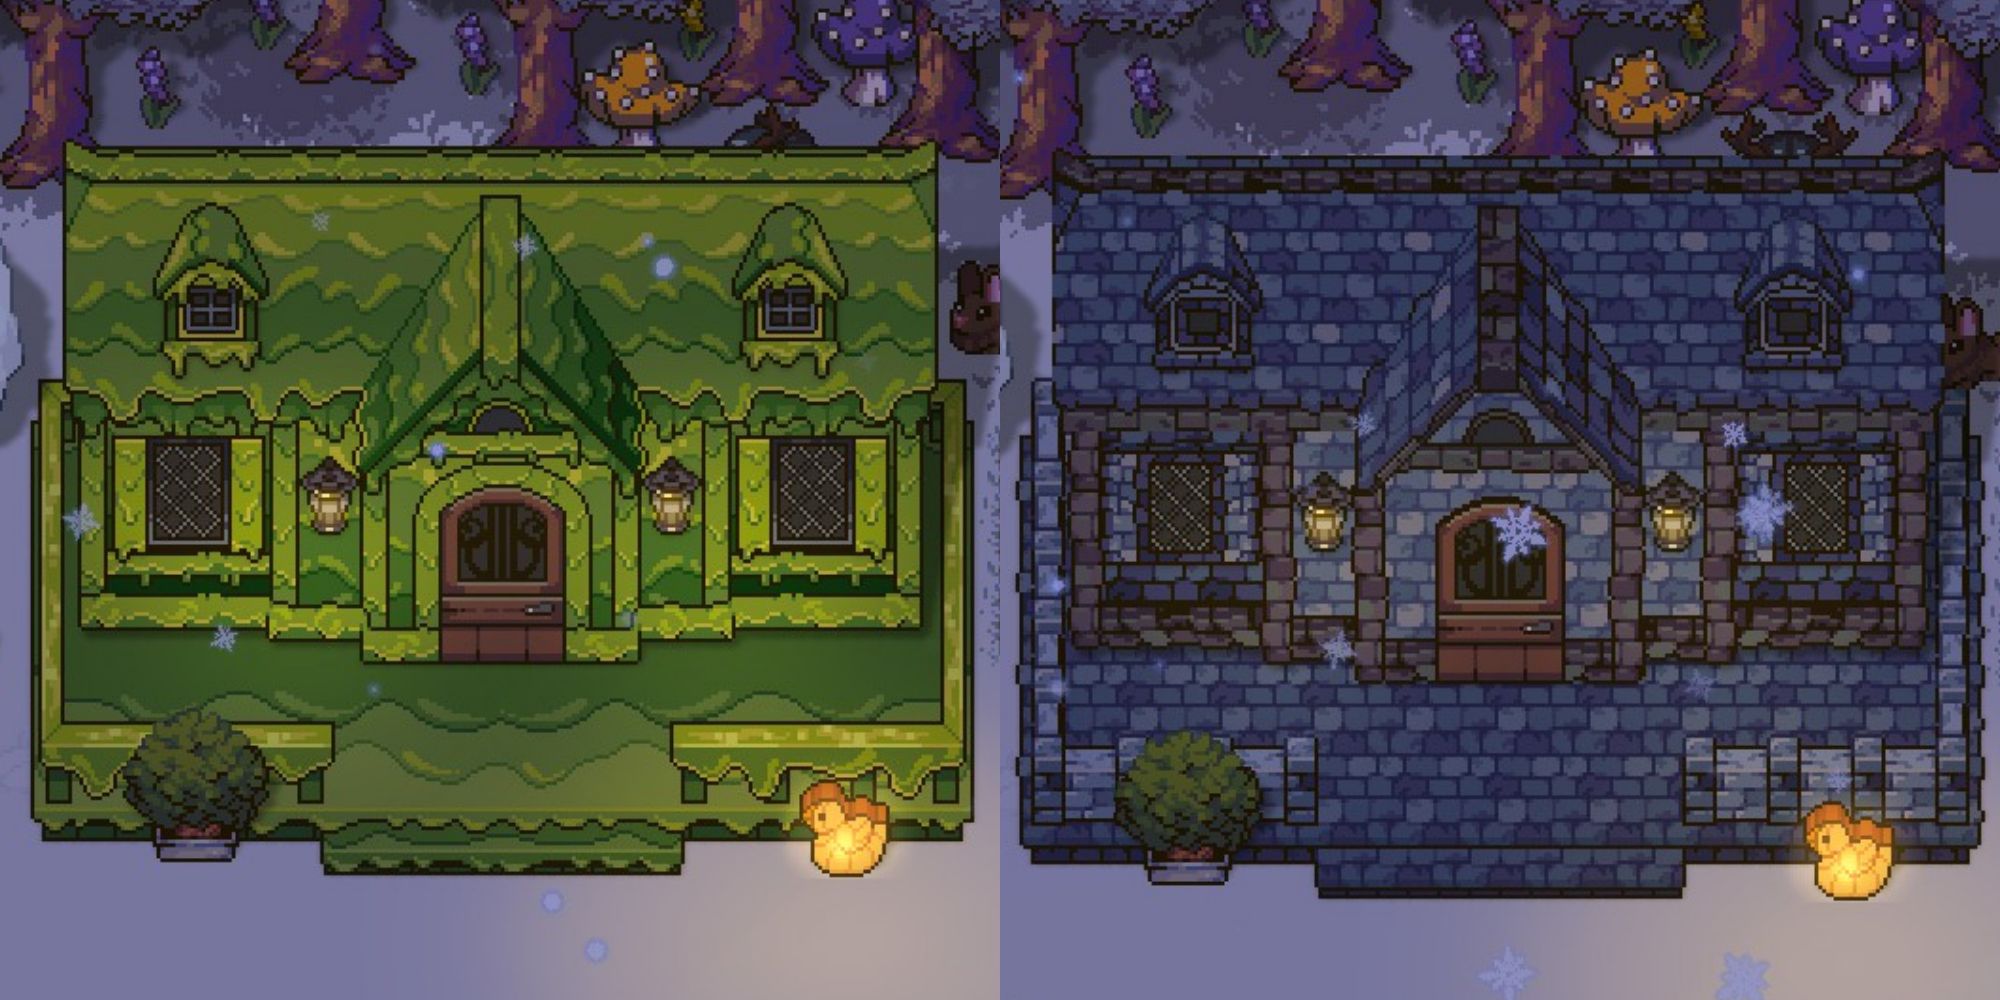 A collage showing a slime house and an old stone house from Sun Haven.